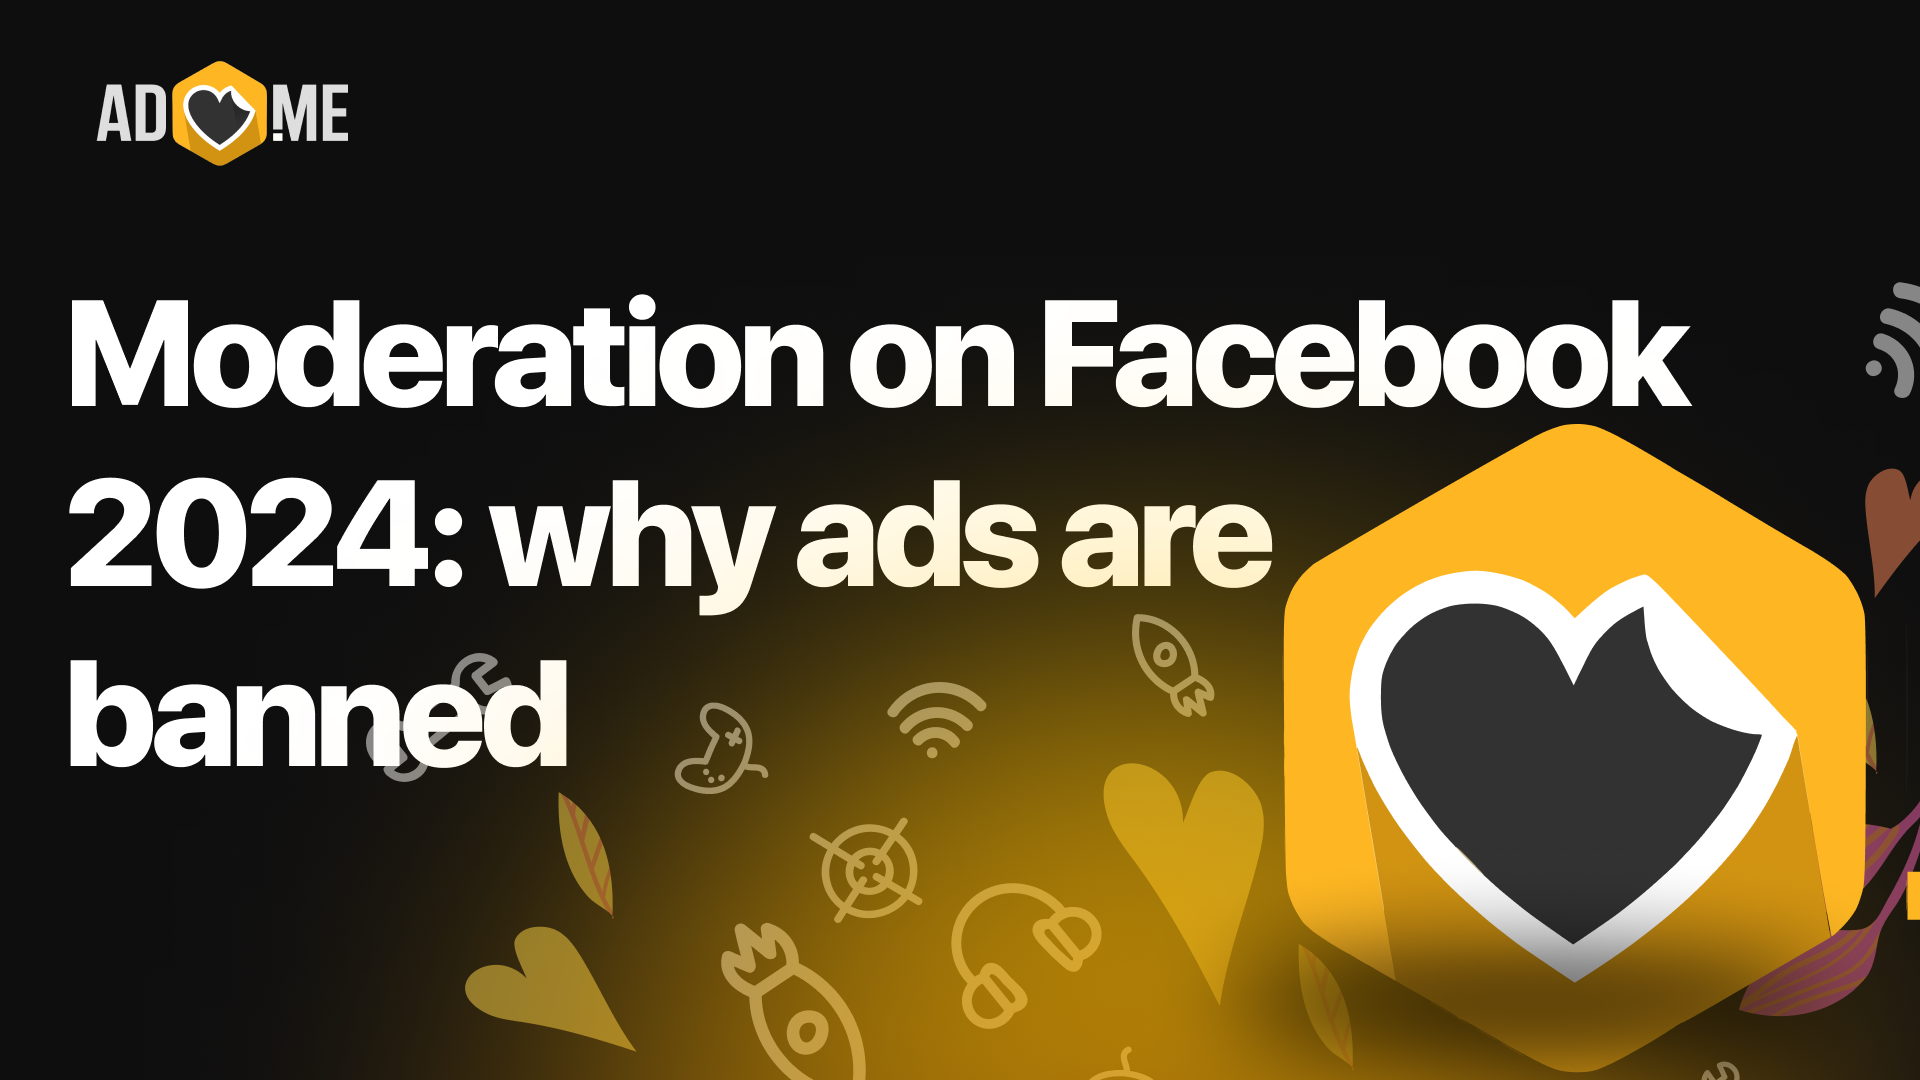 All about moderation on Facebook 2024: why ads are banned and how to avoid it